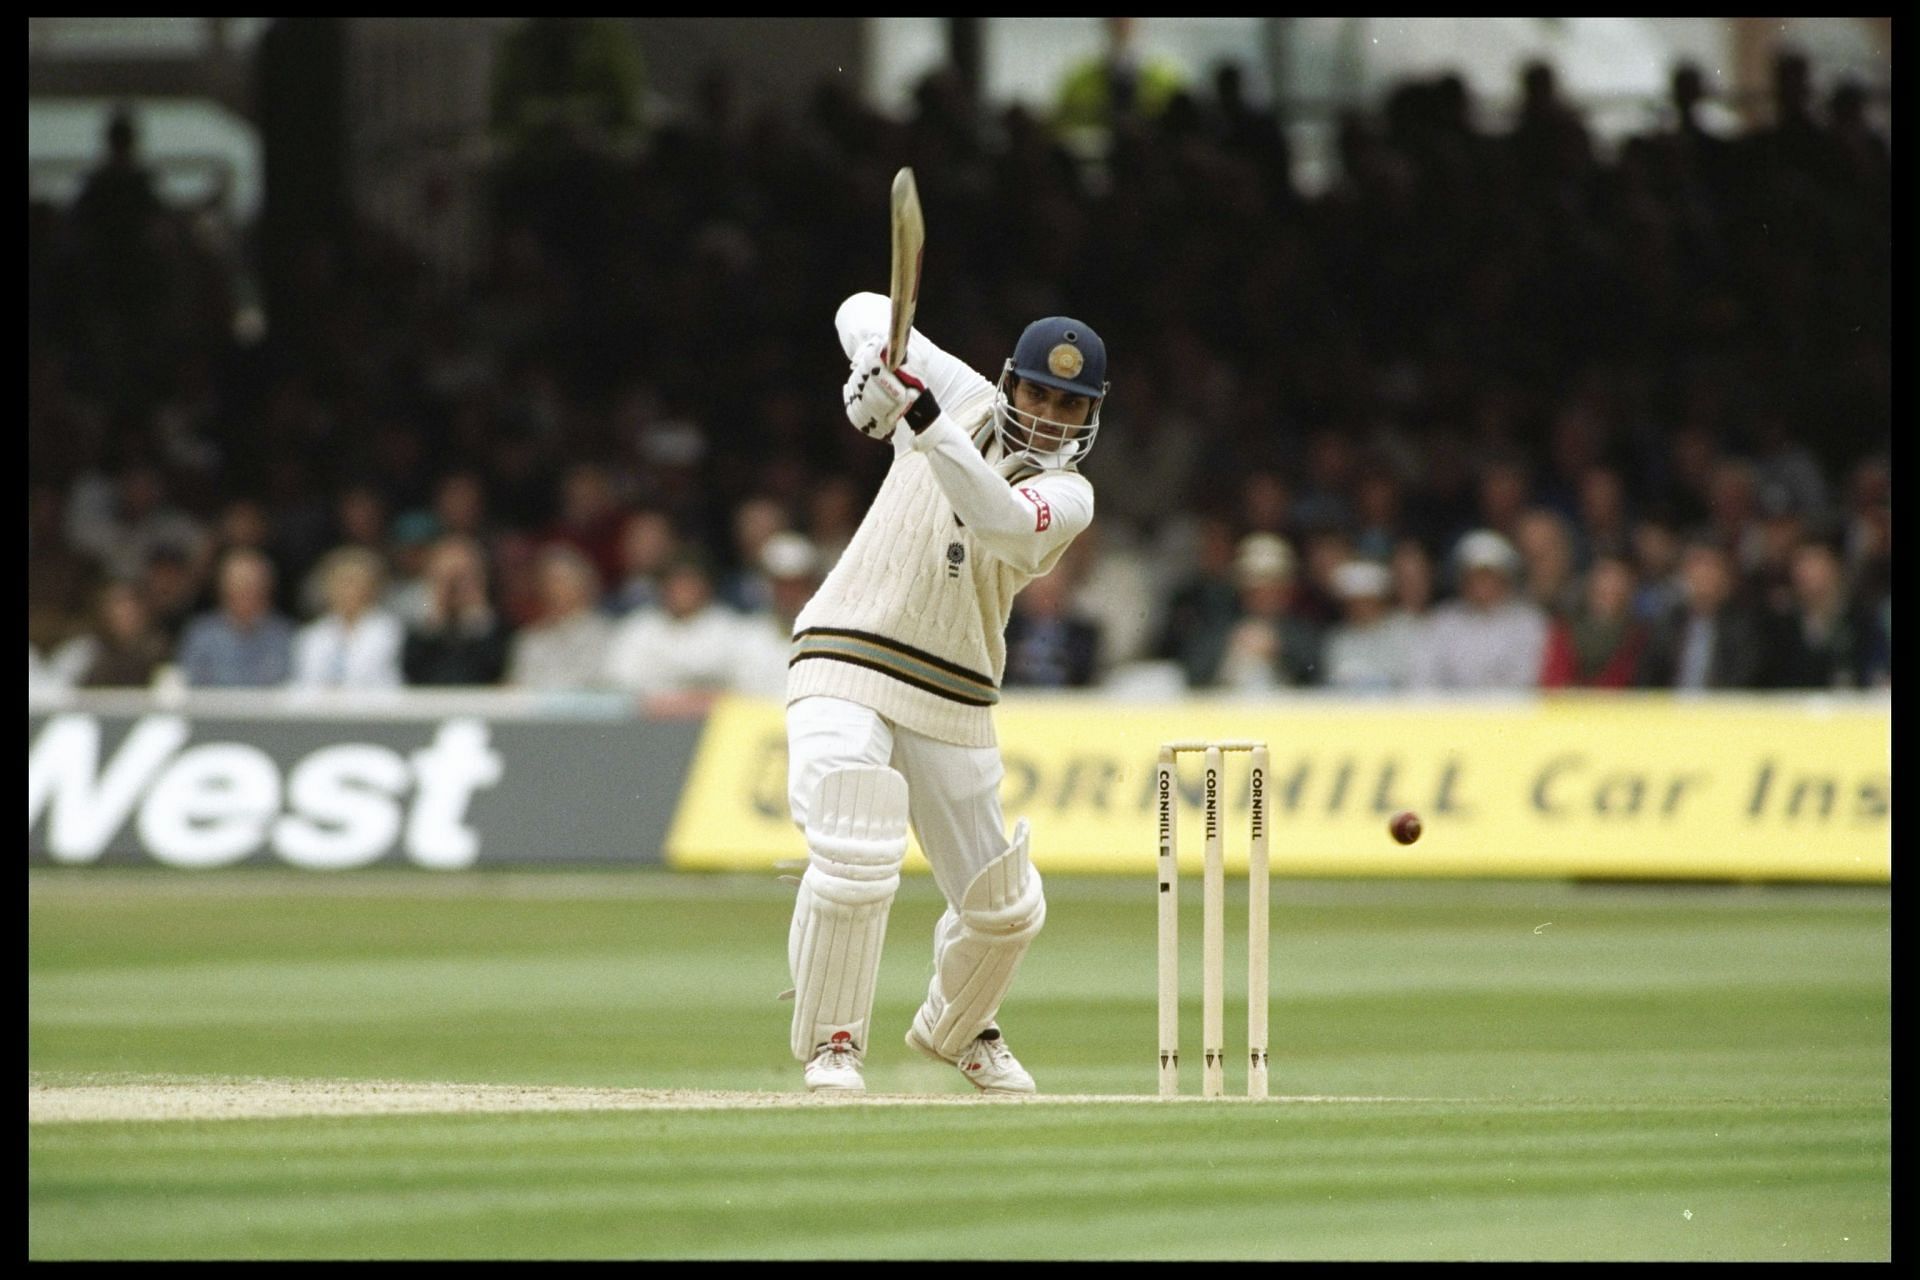 Sourav Ganguly batting on Test debut at Lord&rsquo;s. Pic: Getty Images